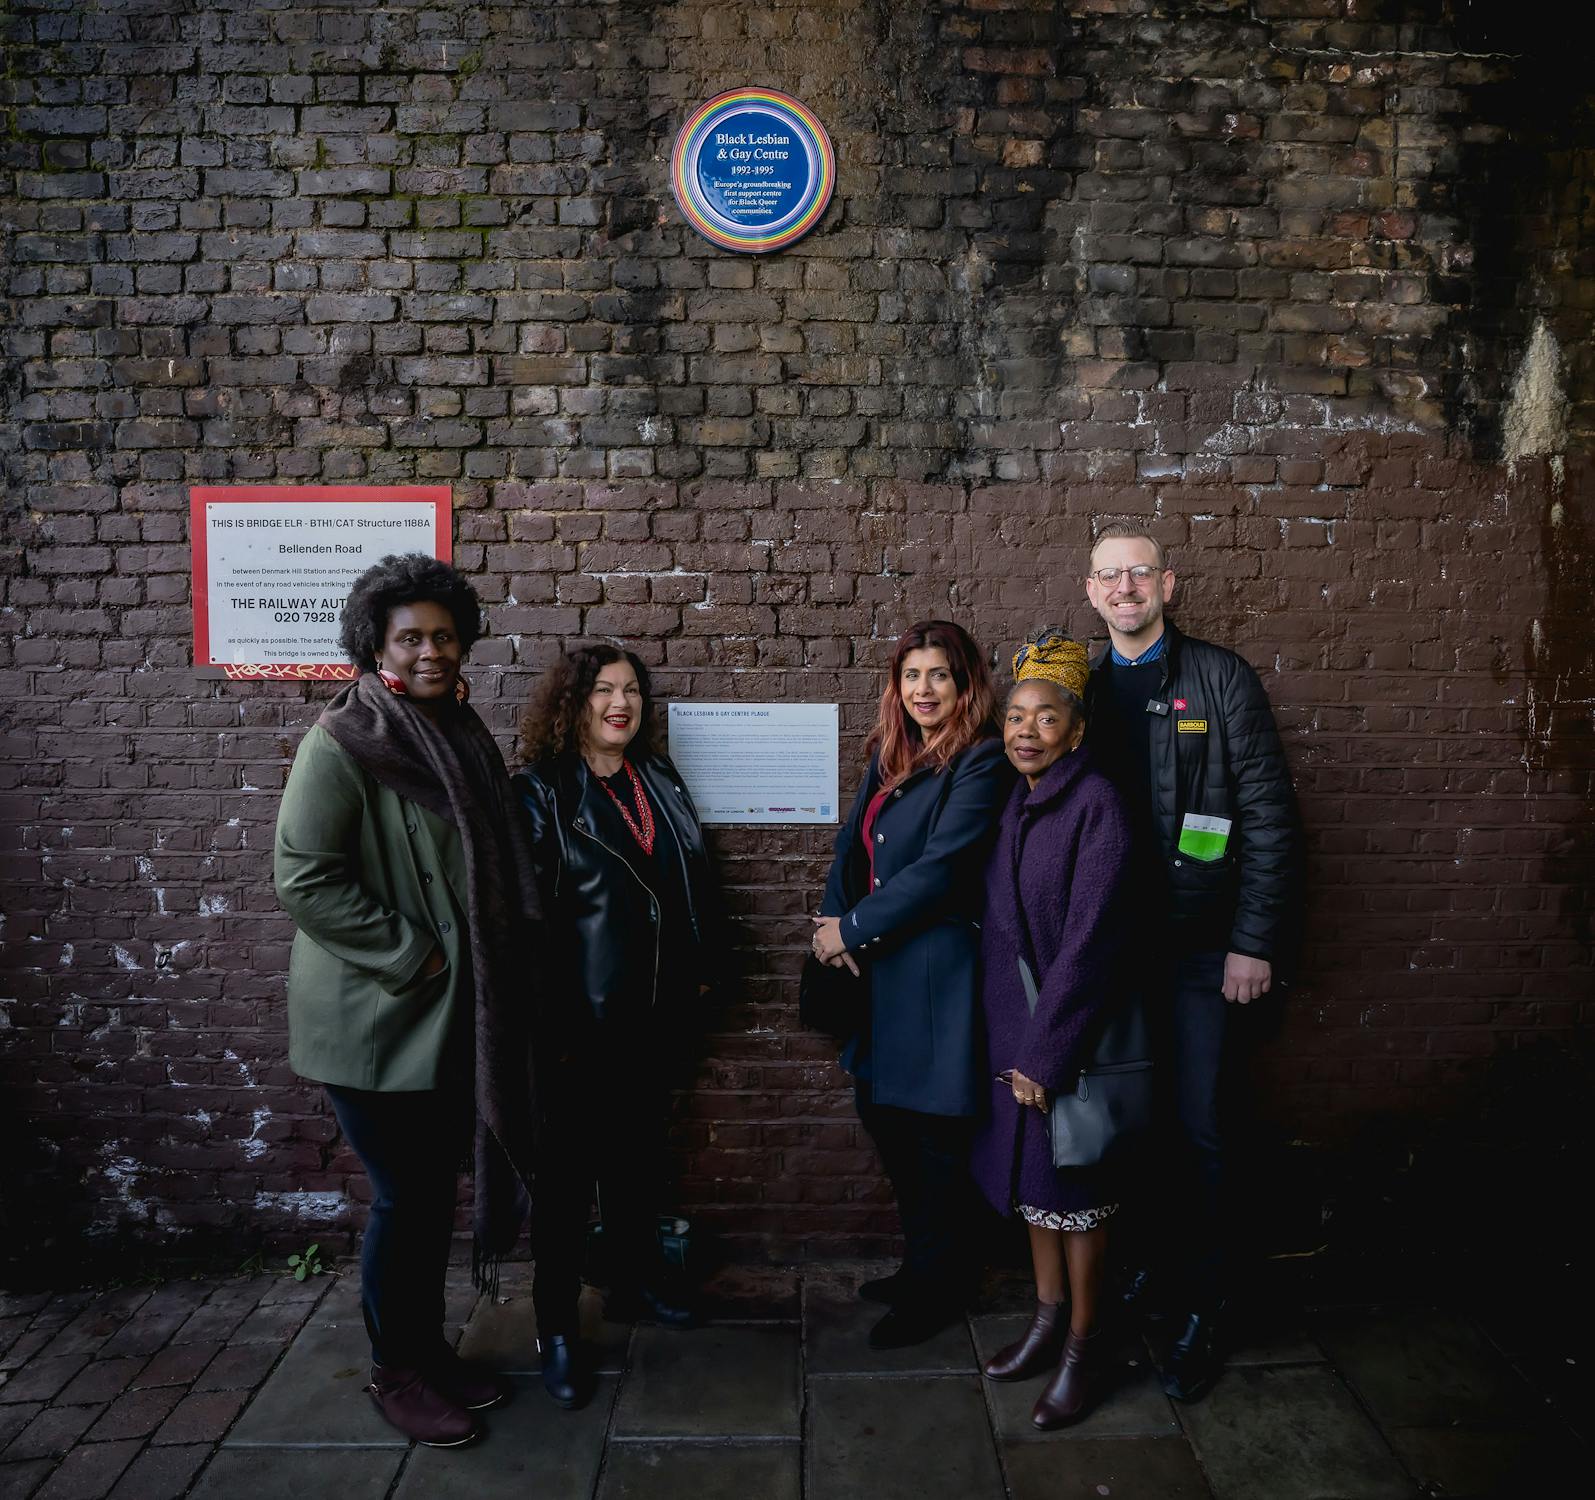 Former staff members of the Black Lesbian and Gay Centre standing in front of a wall mounted Plaque in the background